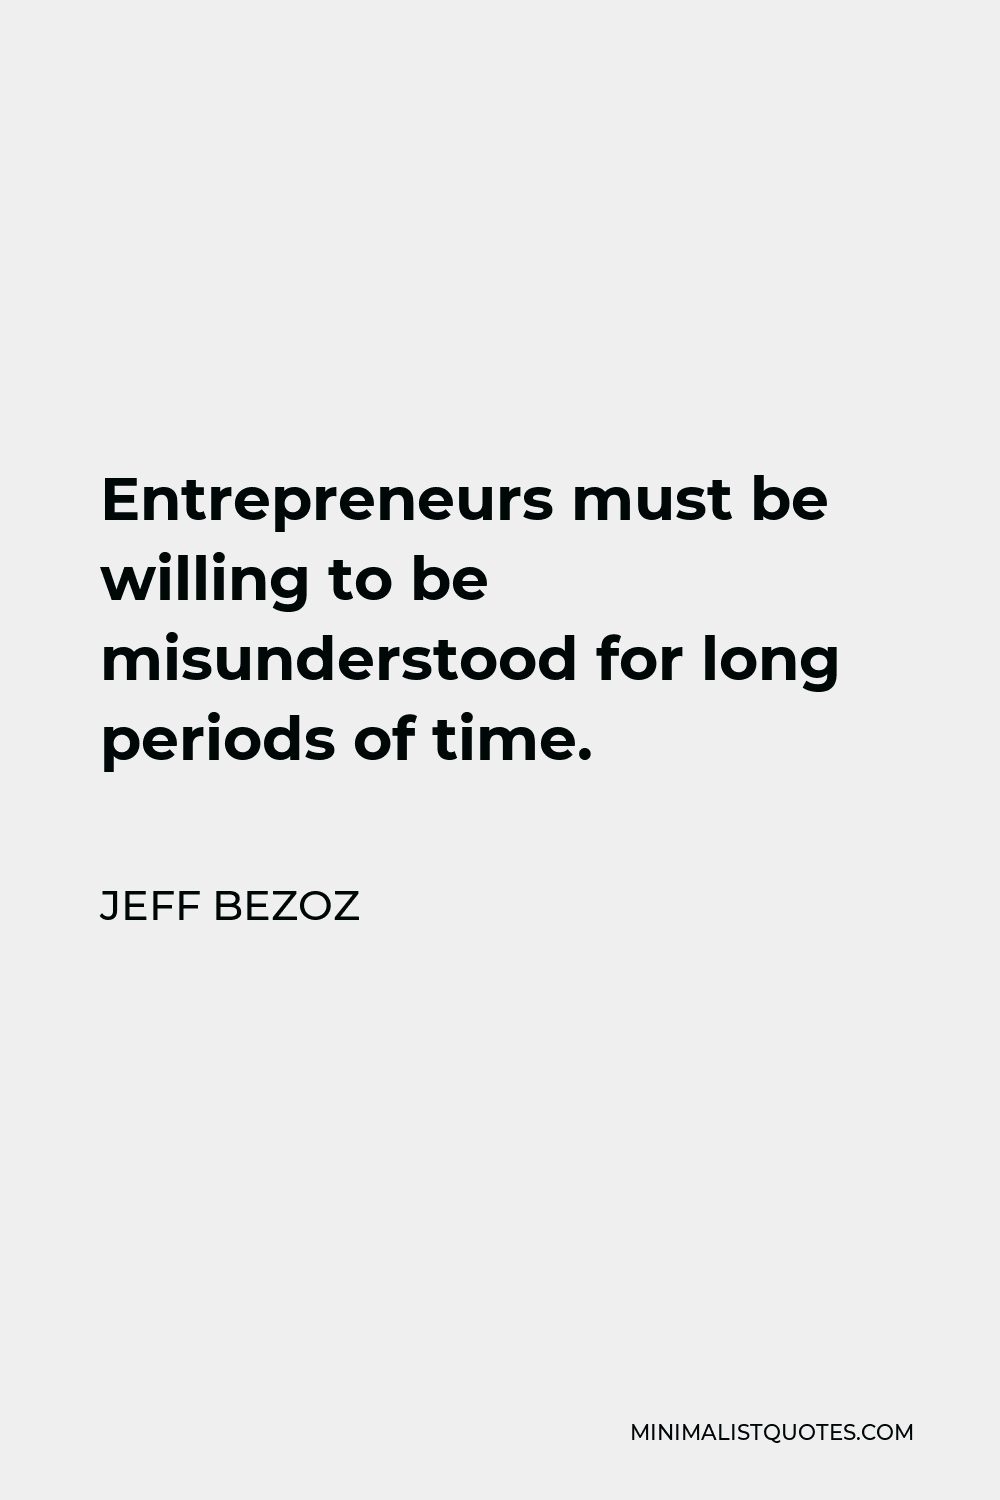 Jeff Bezoz Quote - Entrepreneurs must be willing to be misunderstood for long periods of time.